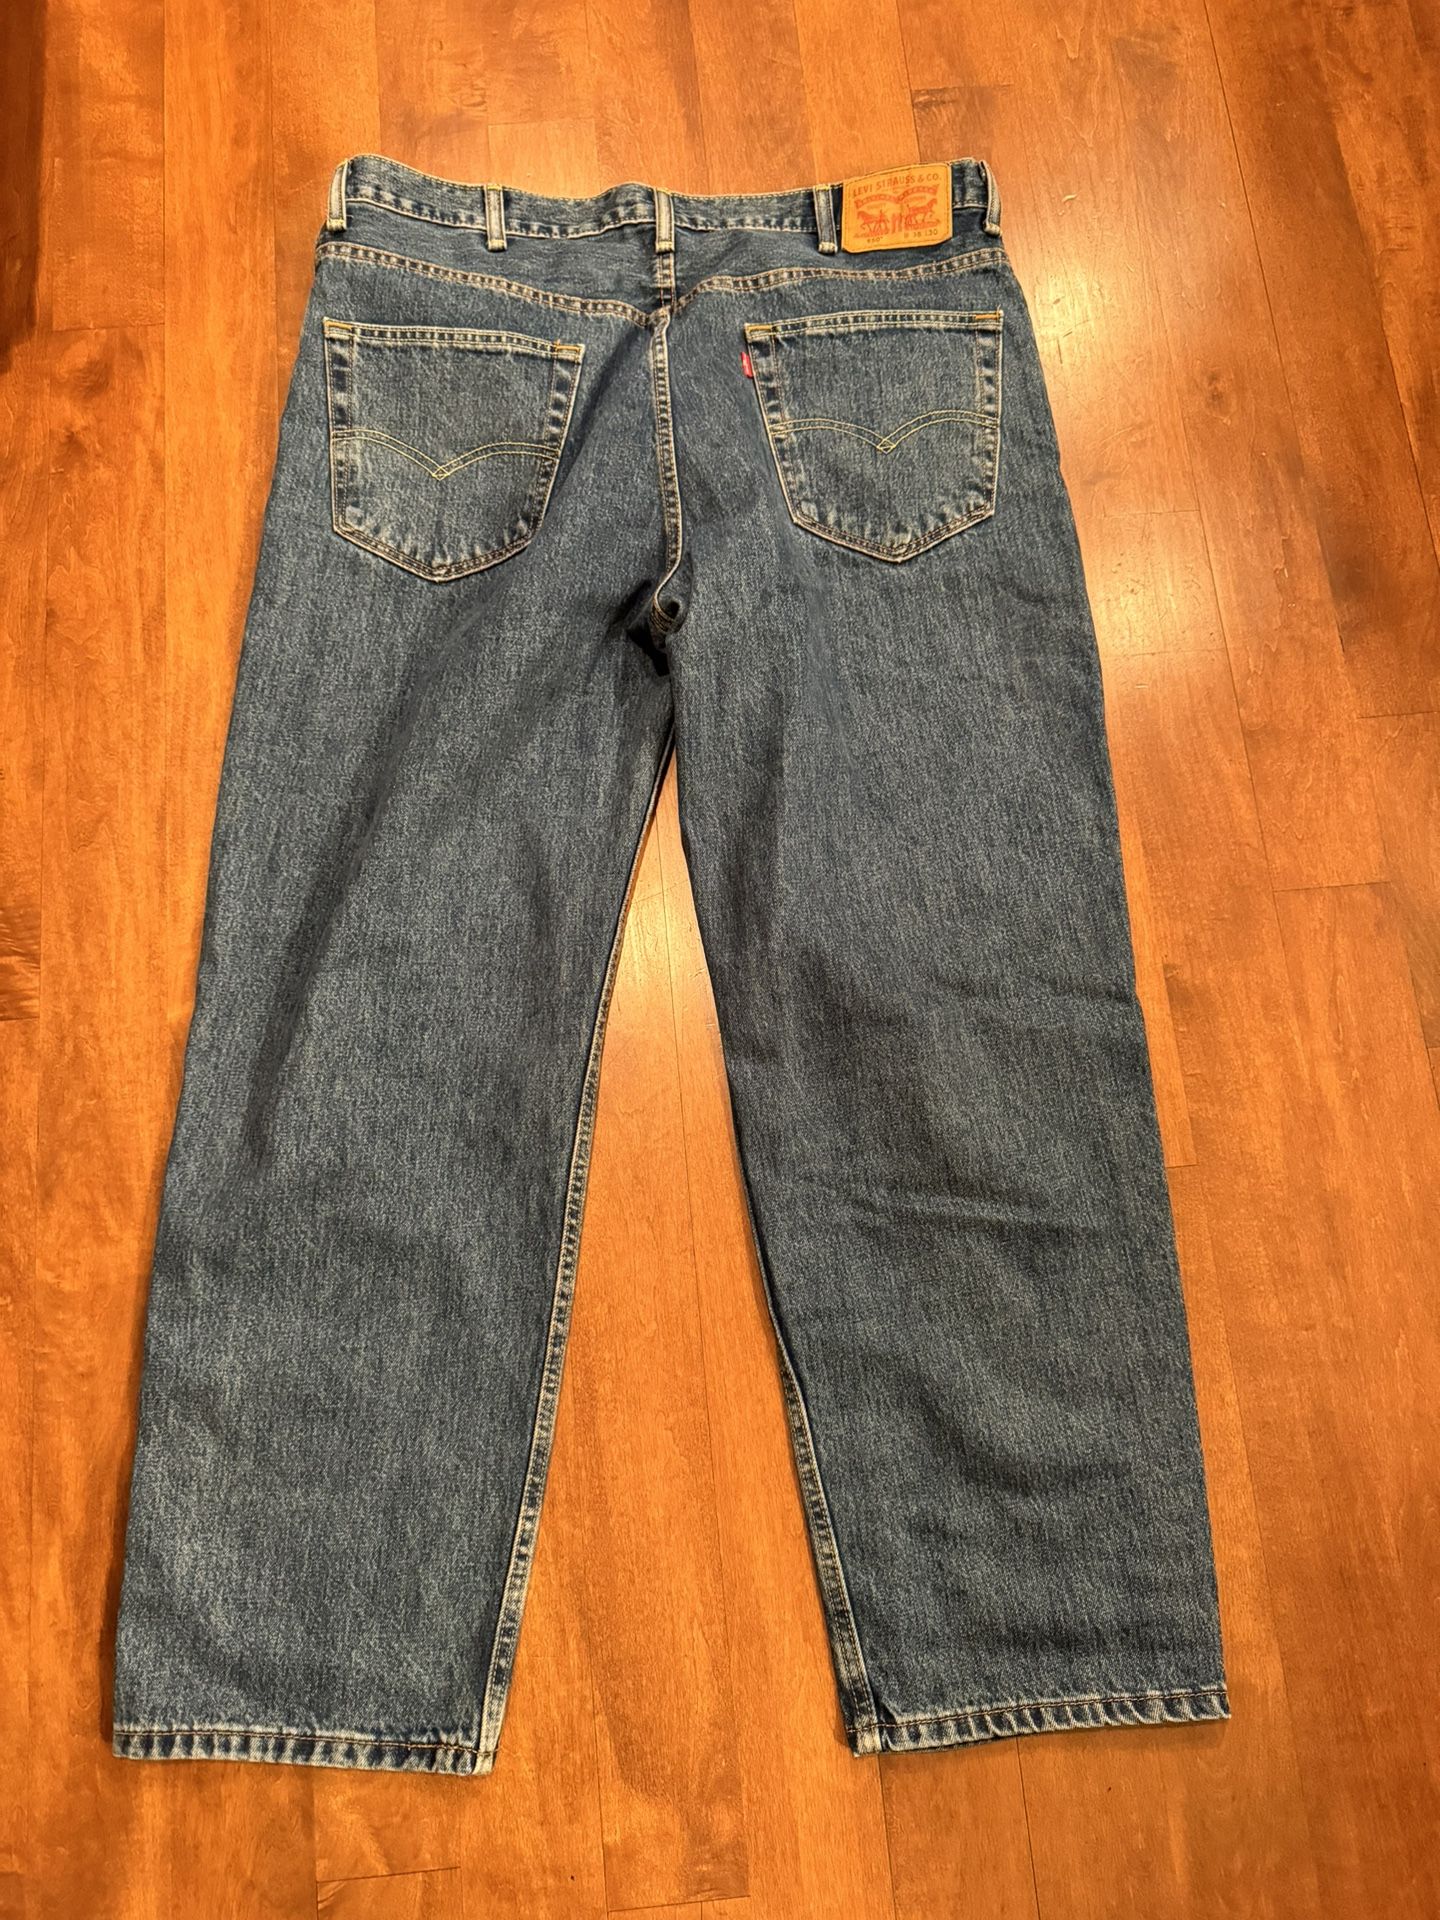 Mens Levi’s 550 Jeans Shipping Available 